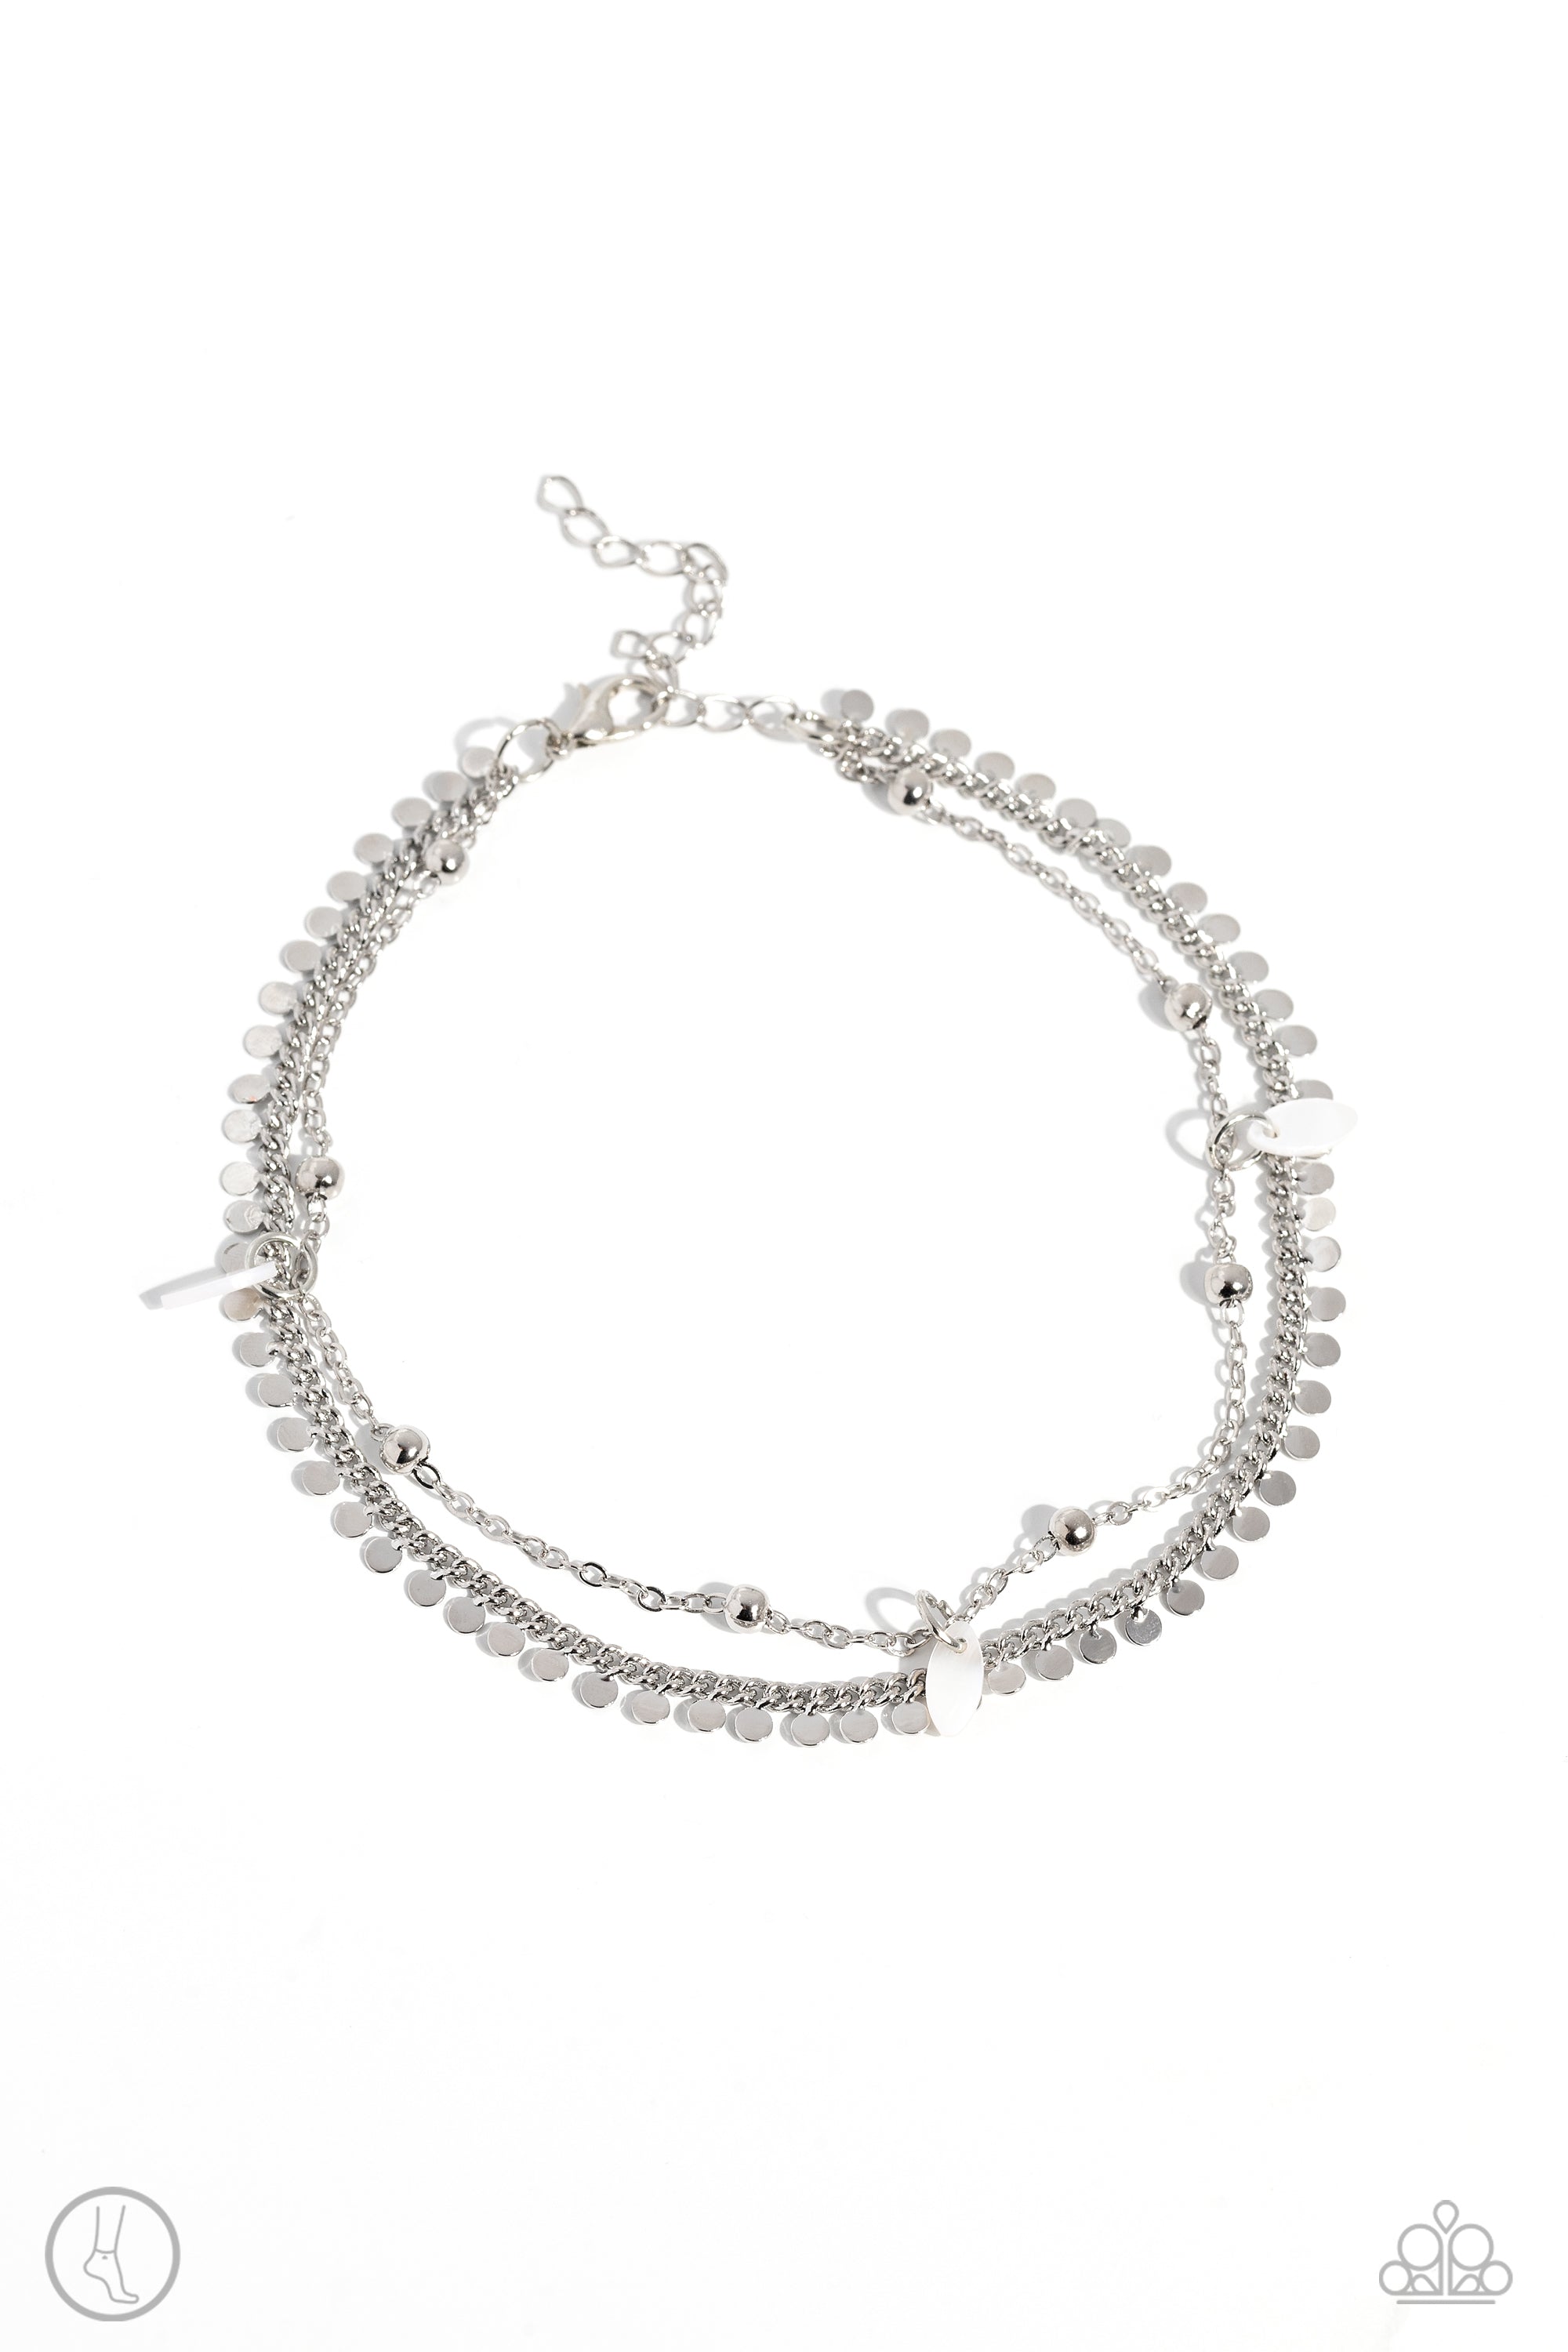 Surf City White & Silver Chain Anklet - Paparazzi Accessories- lightbox - CarasShop.com - $5 Jewelry by Cara Jewels